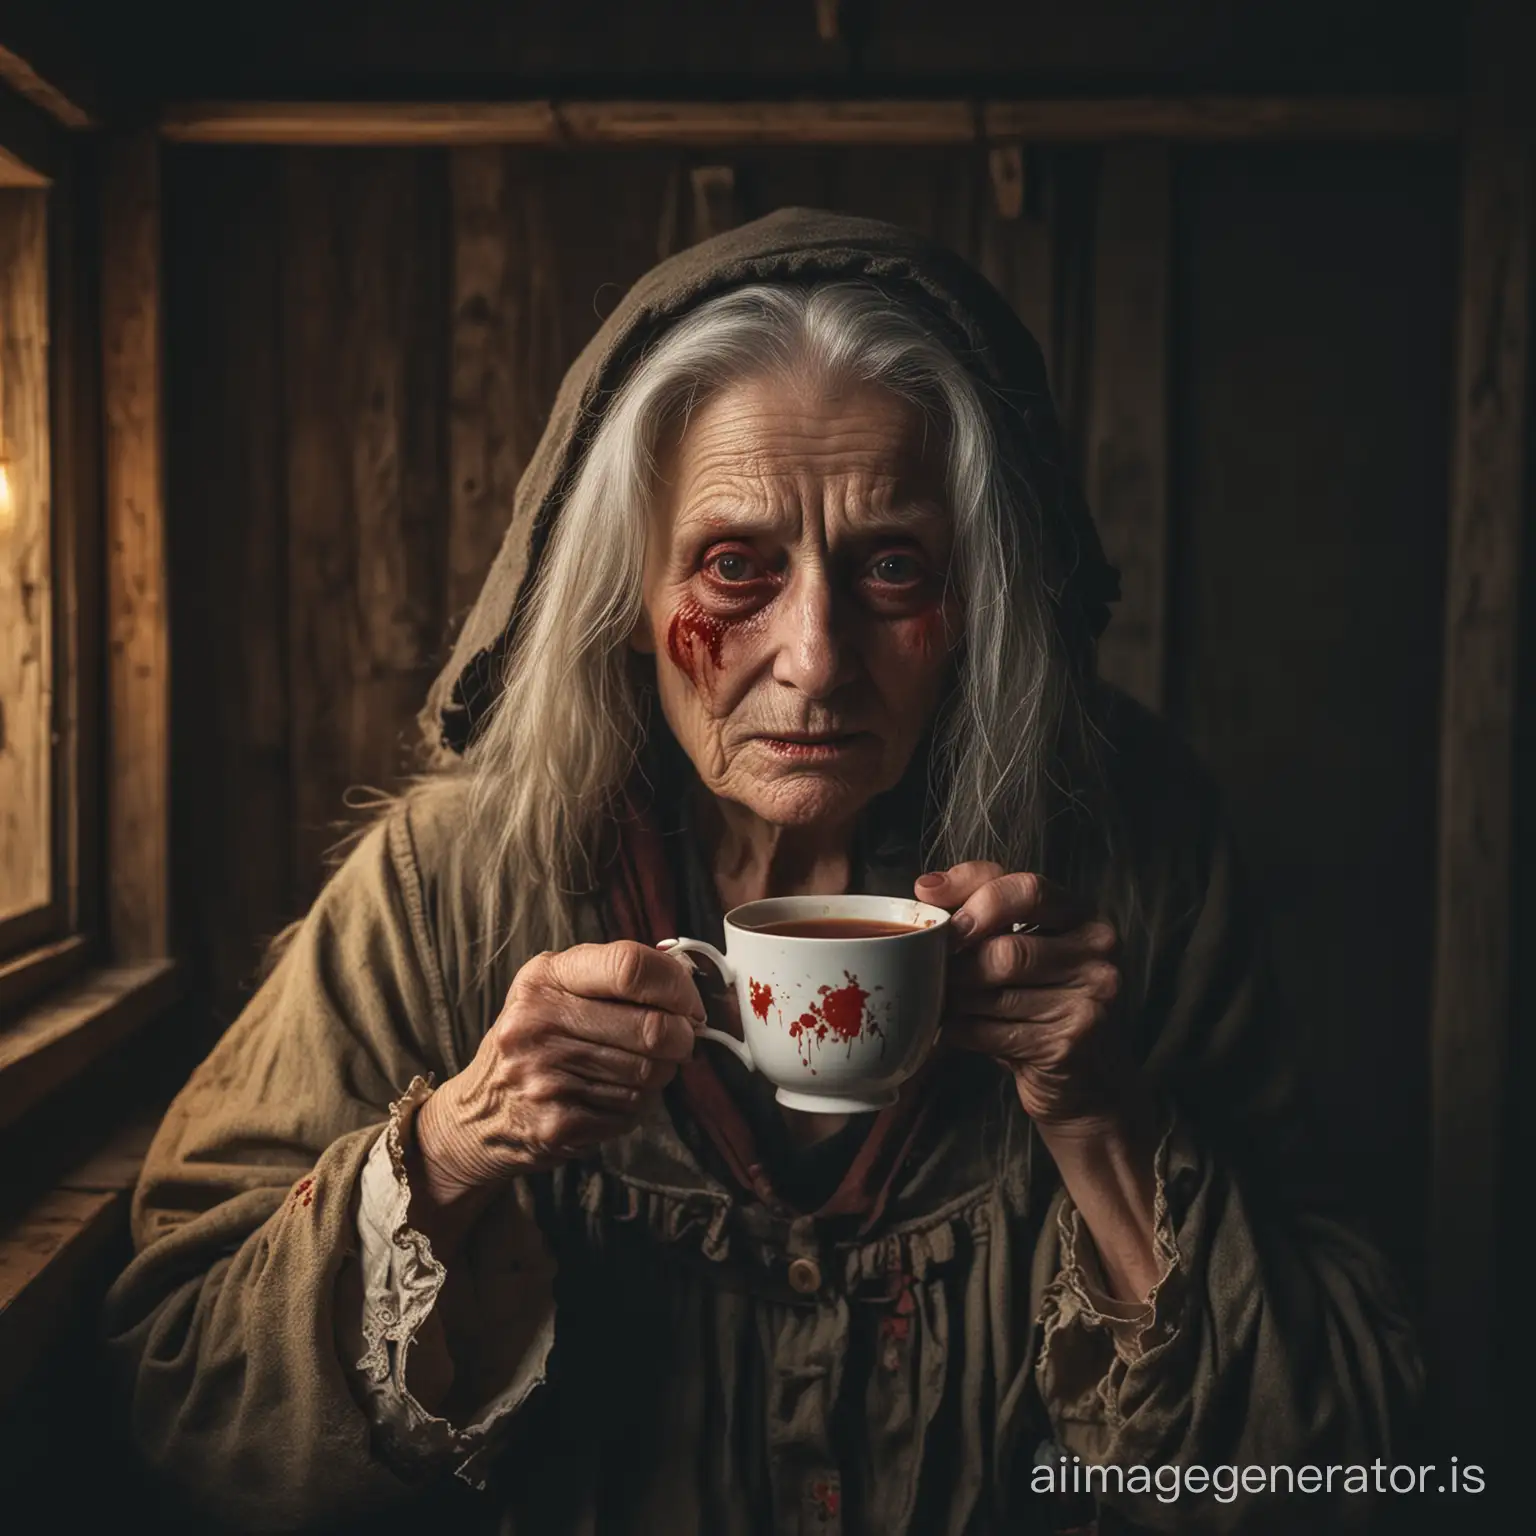 Mysterious-Old-Woman-Holding-Teacup-in-Dark-Cabin-at-Night